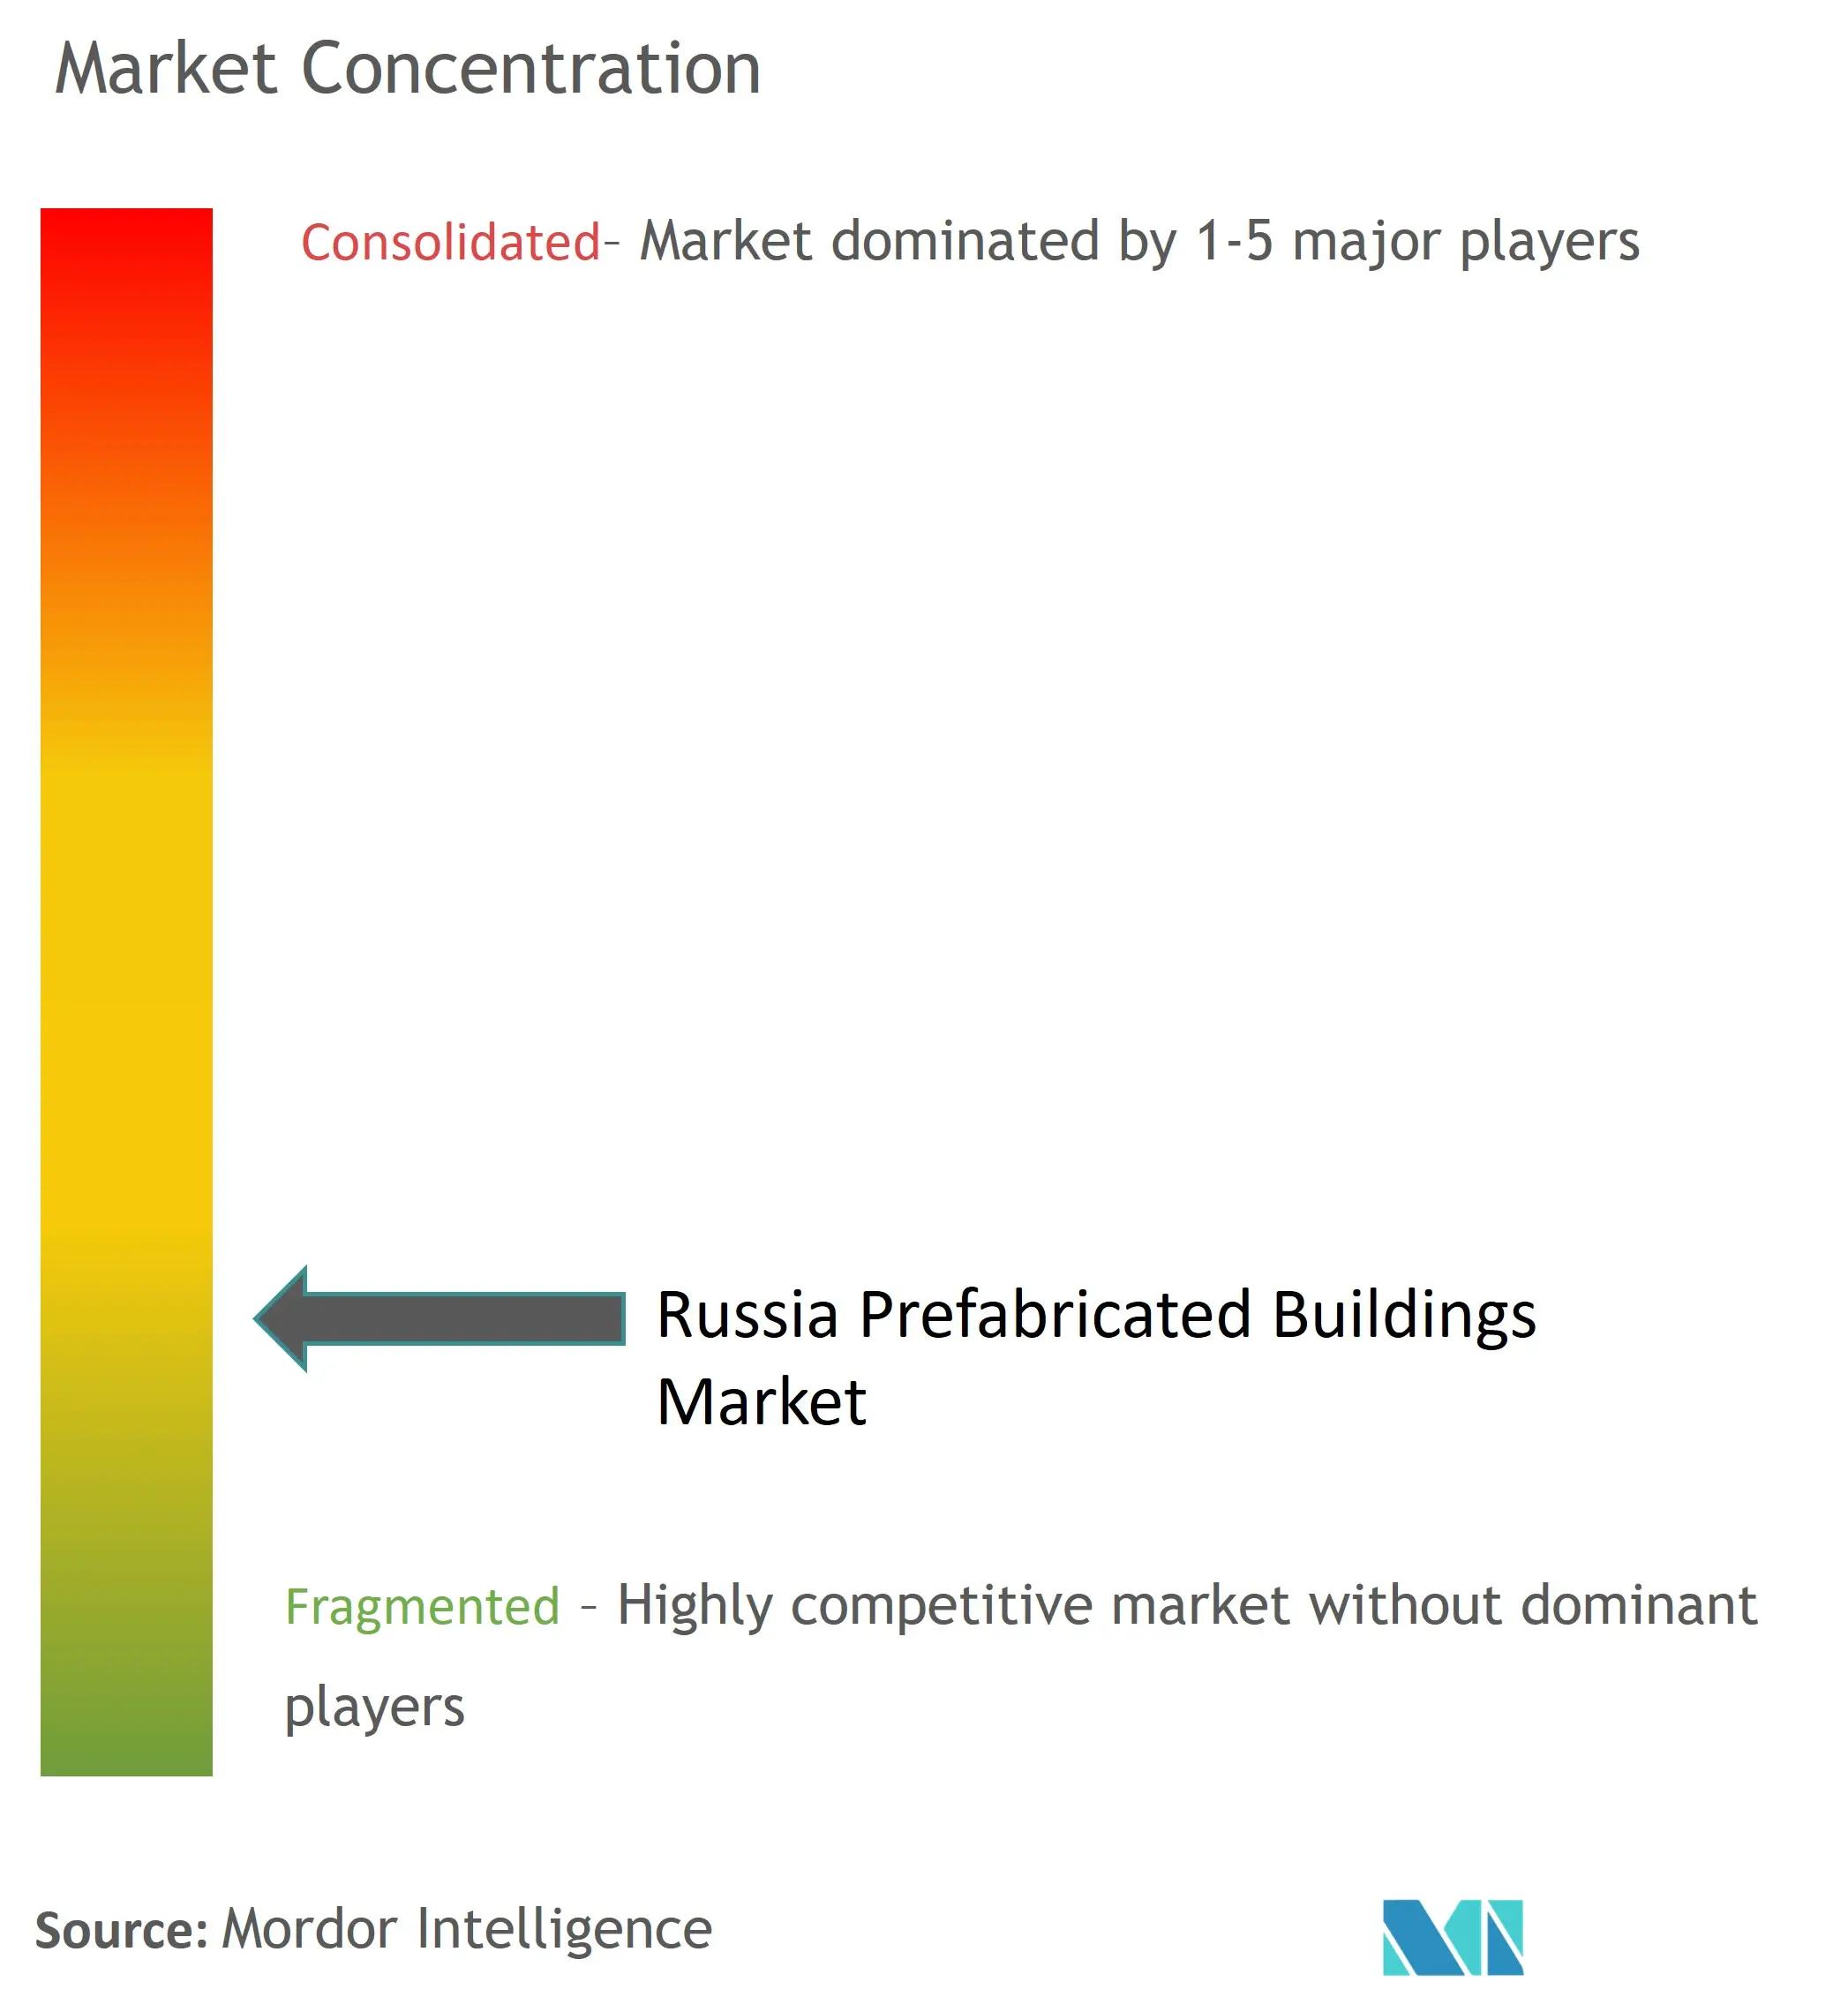 Russia Prefabricated Buildings Market Concentration